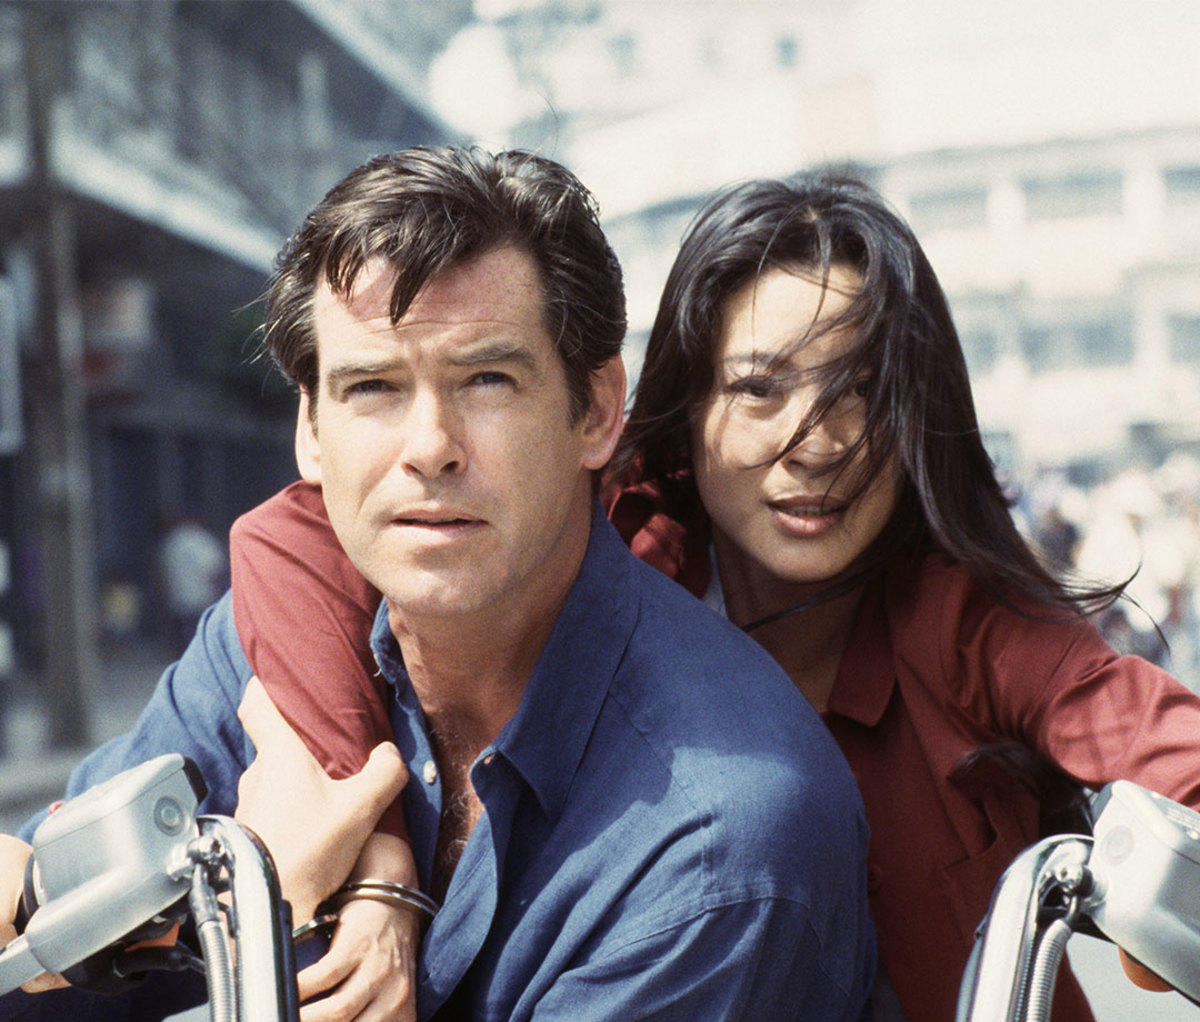 Pierce Brosnan and Malaysian actress Michelle Yeoh in 'Tomorrow Never Dies'